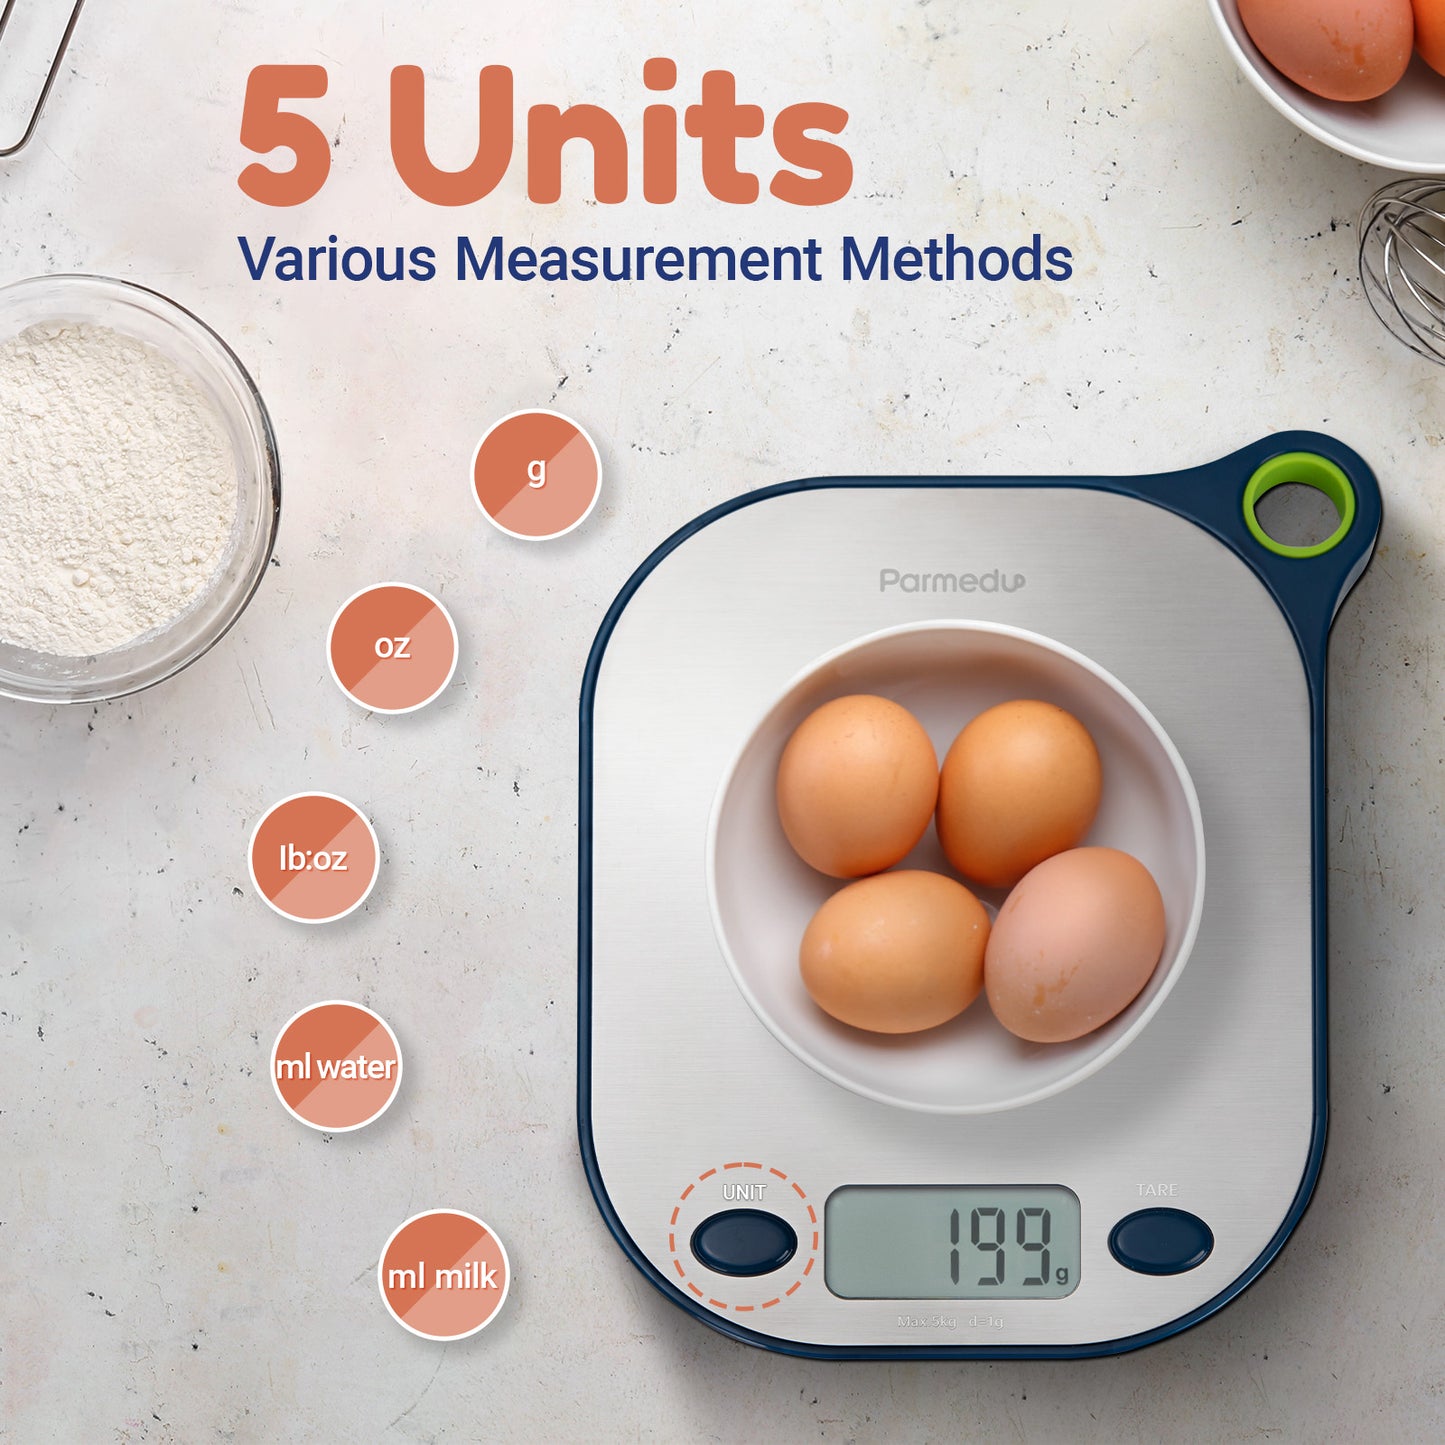 Digital Kitchen Scale for Cooking and Baking